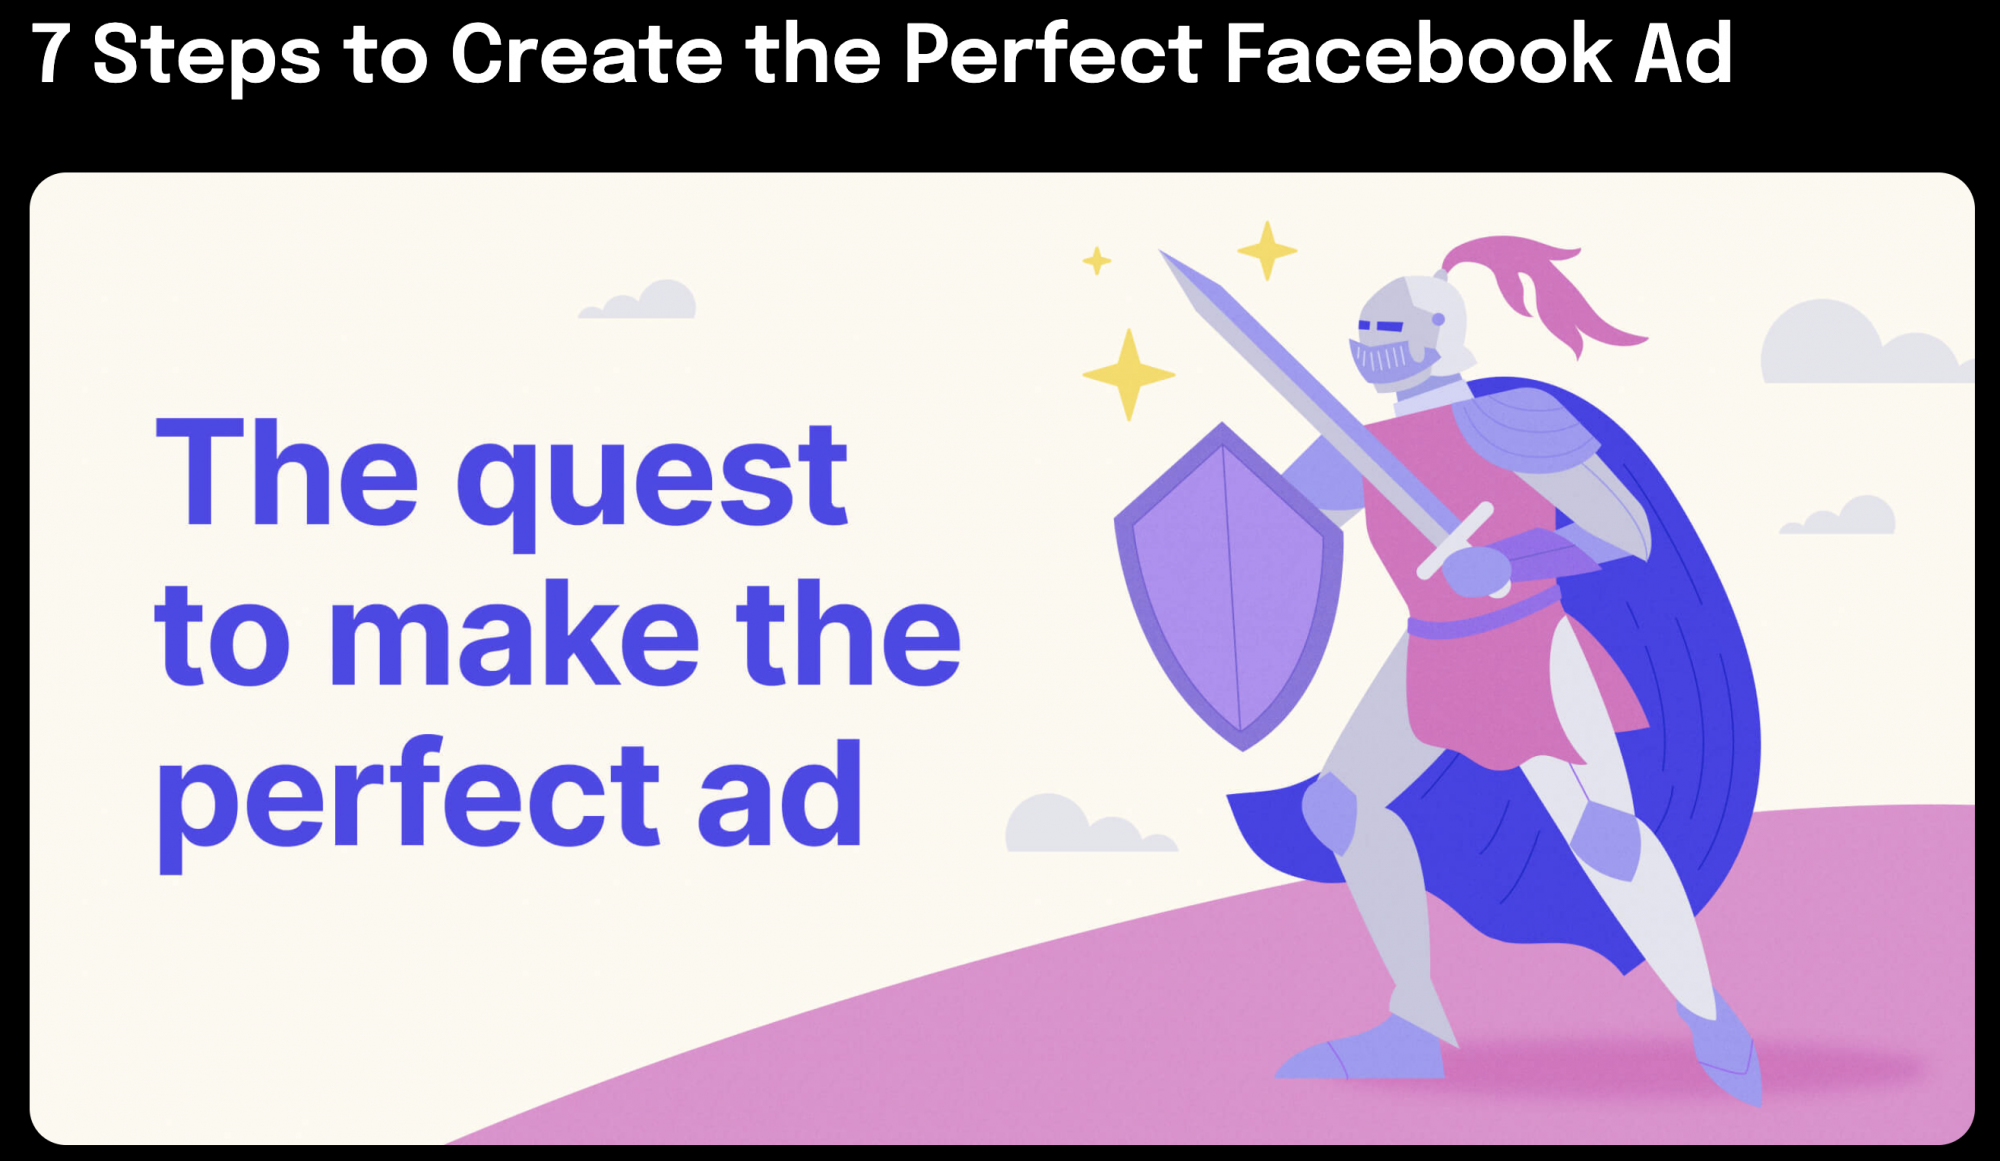 7 Steps to Create the Perfect Facebook Ad